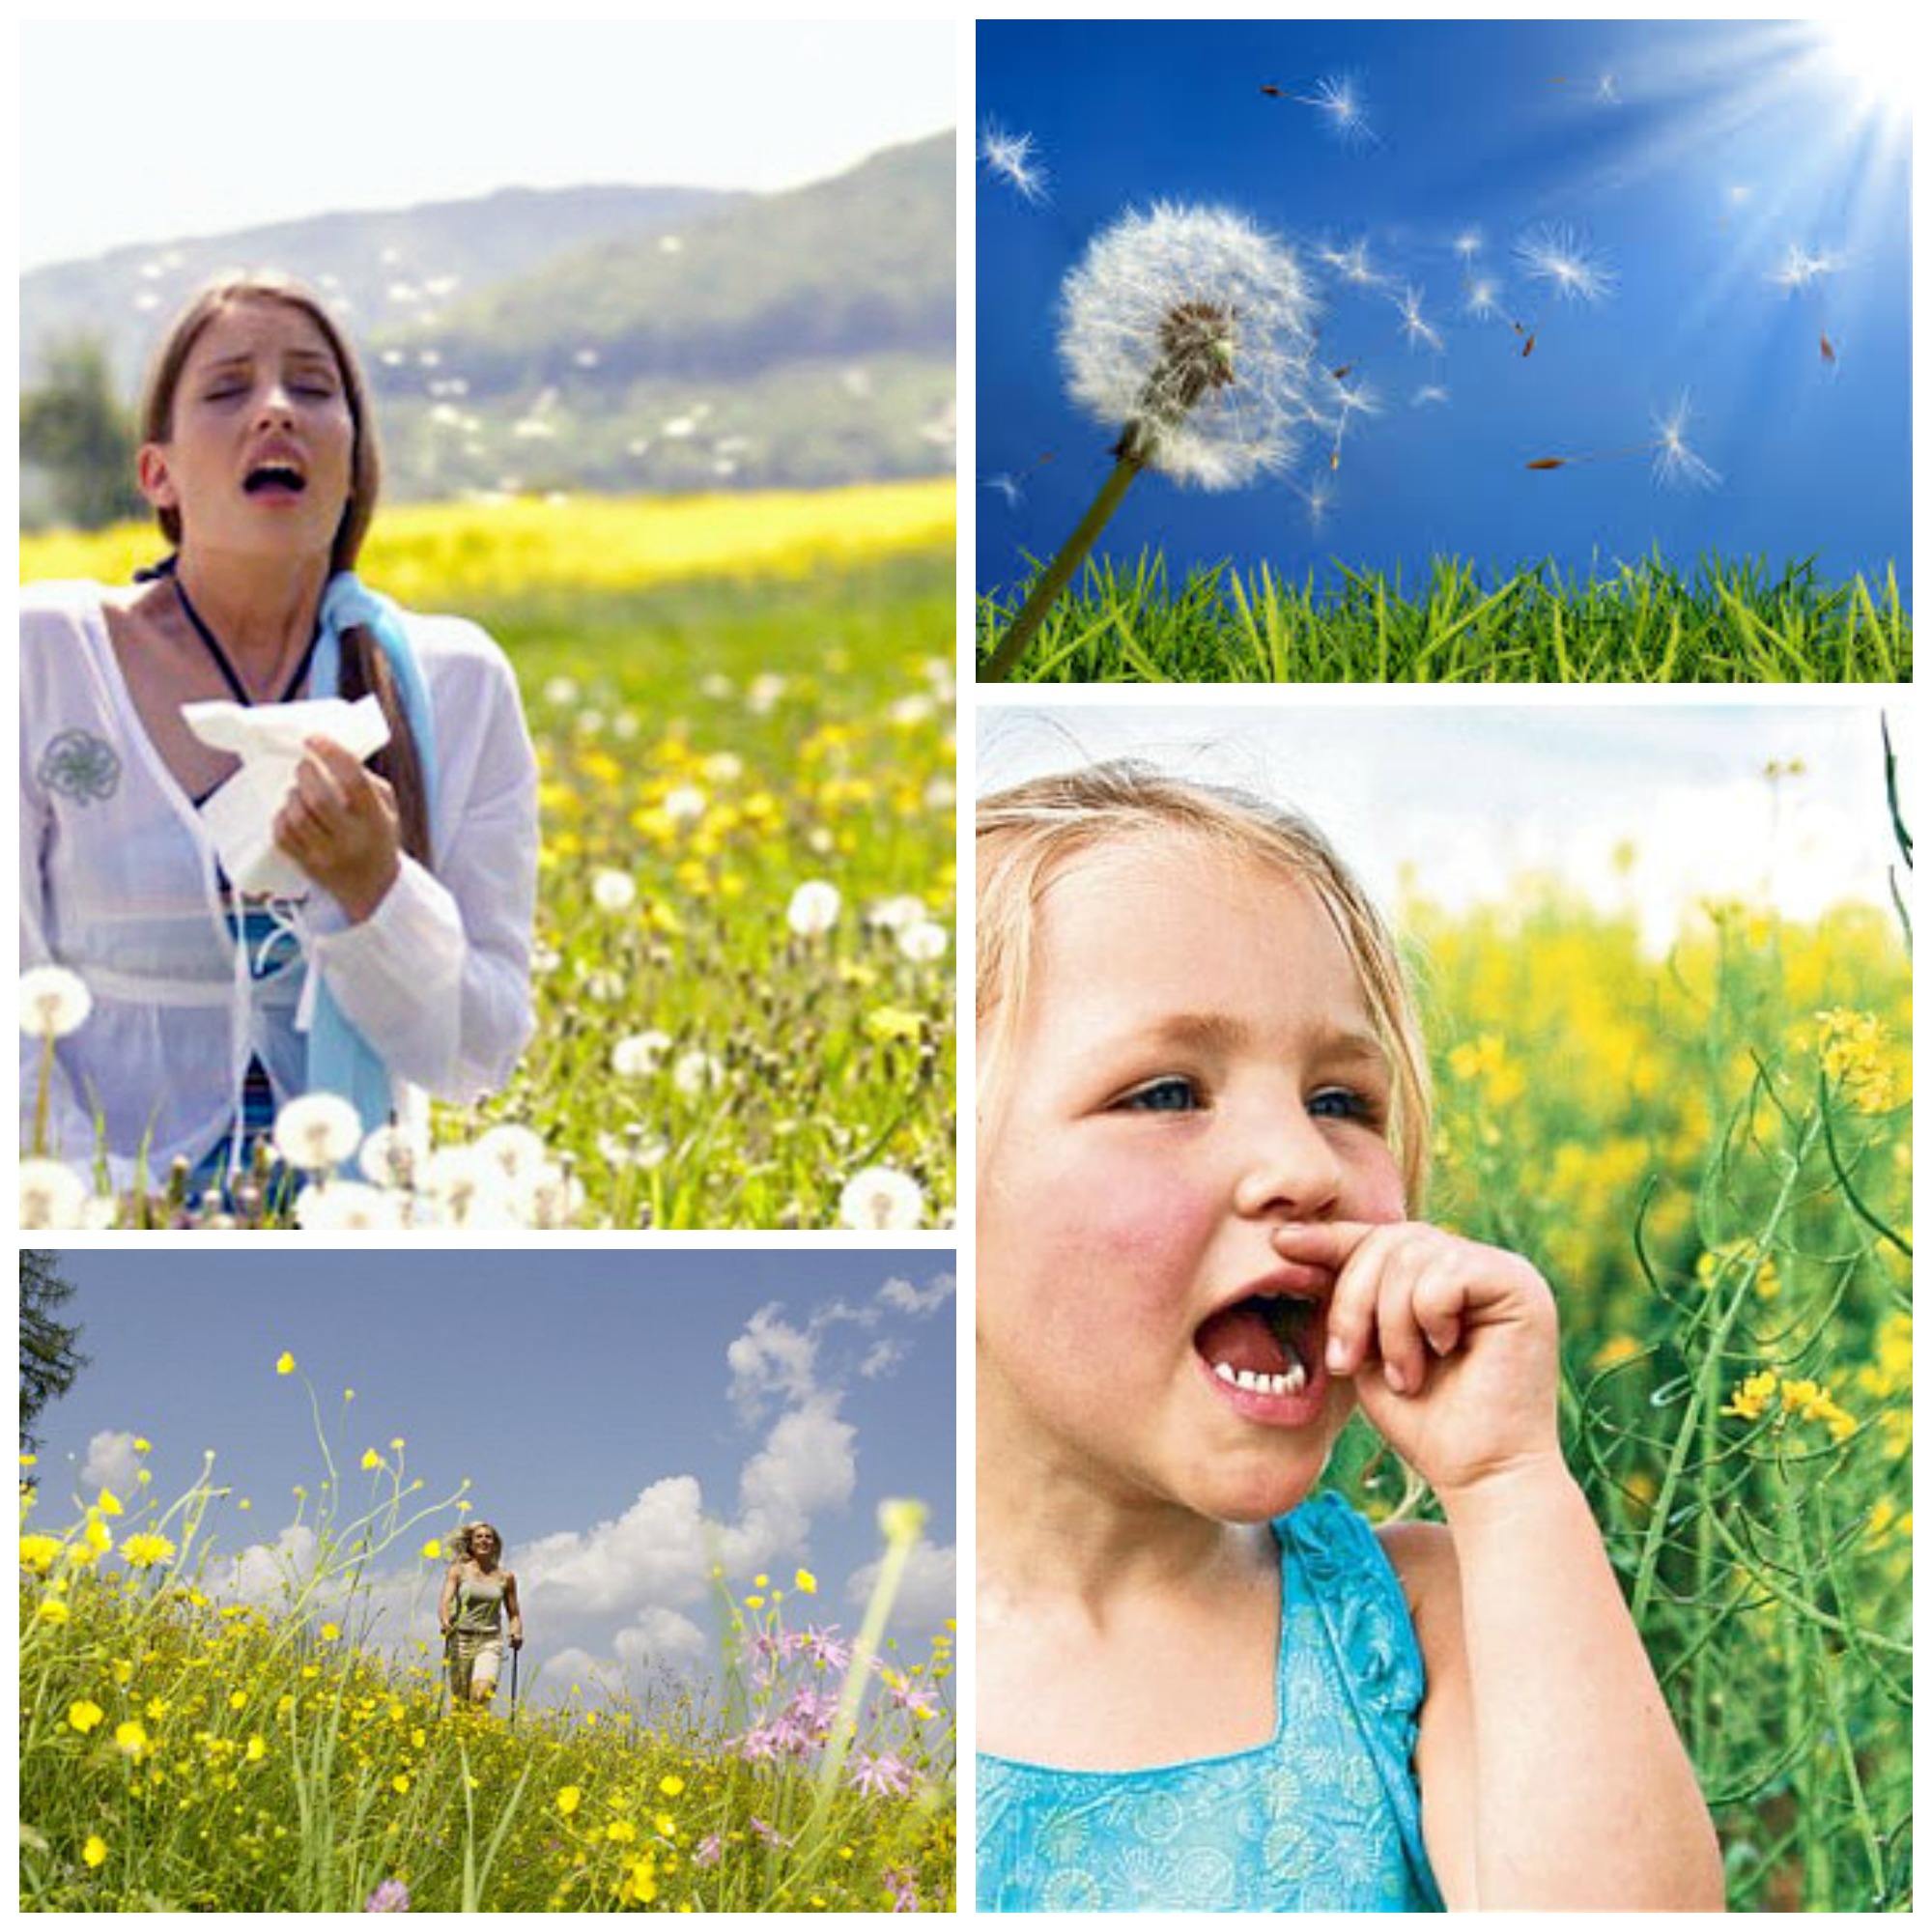 Allergies & Asthma – Change is in the air!